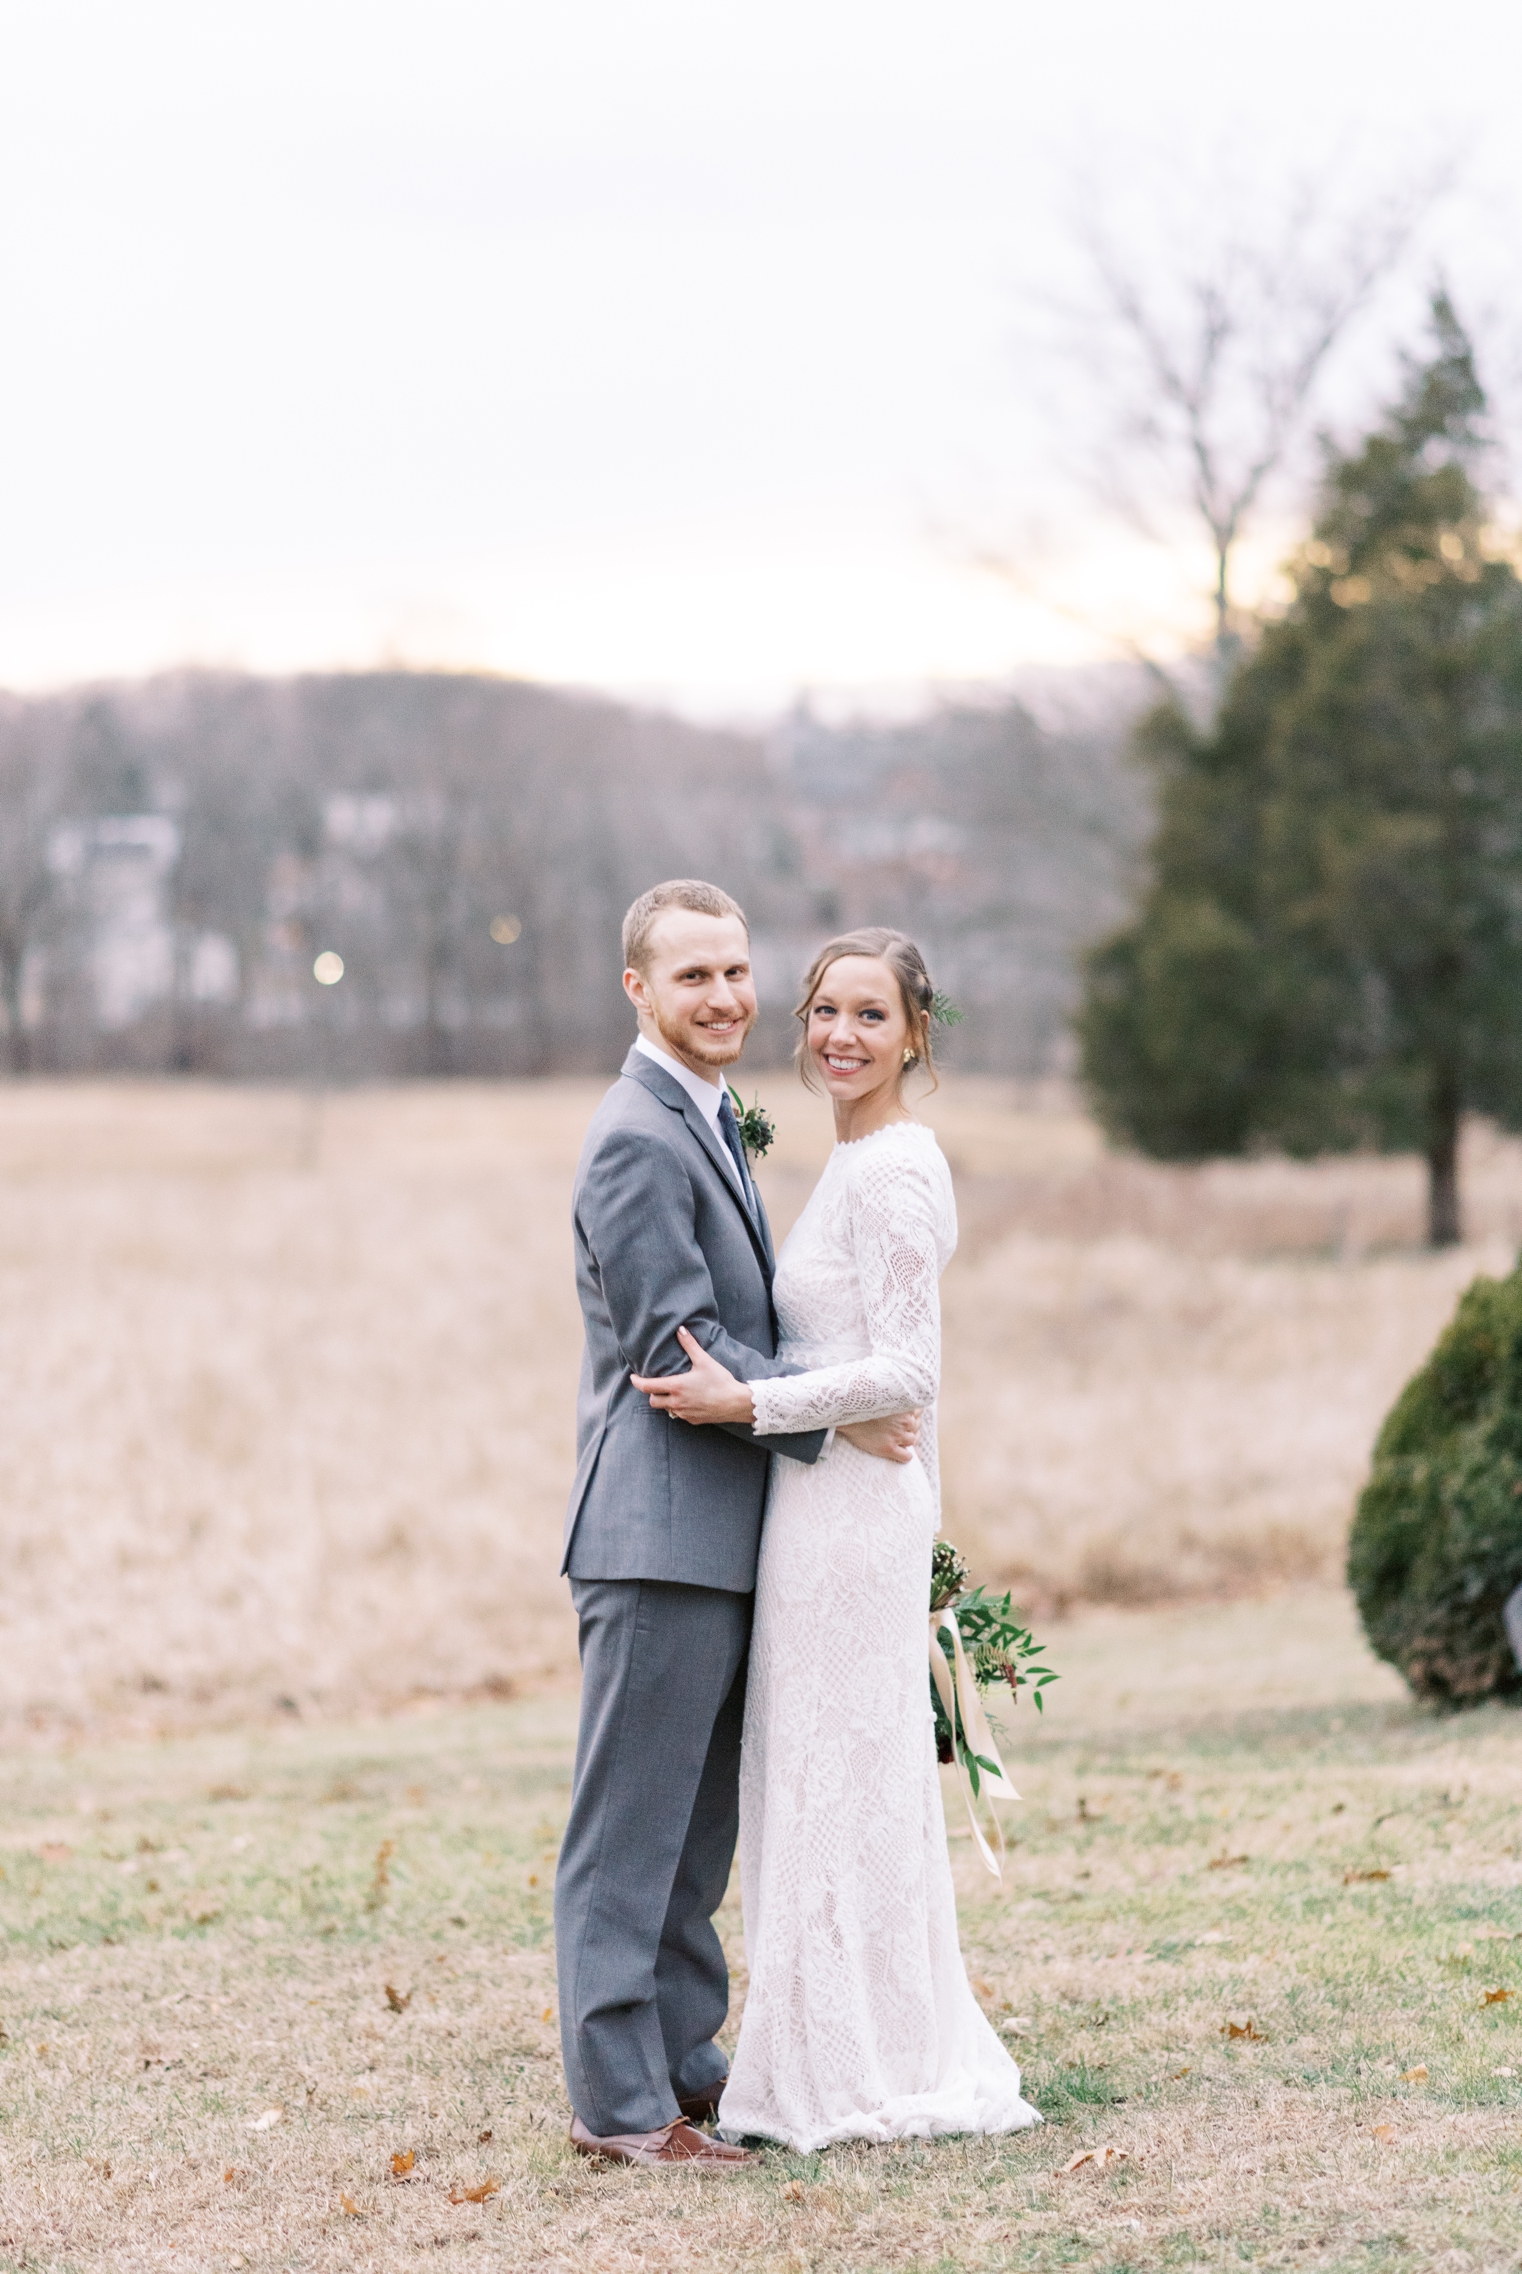 Wedding Portraits at Pennypacker Mills in Montgomery County, PA